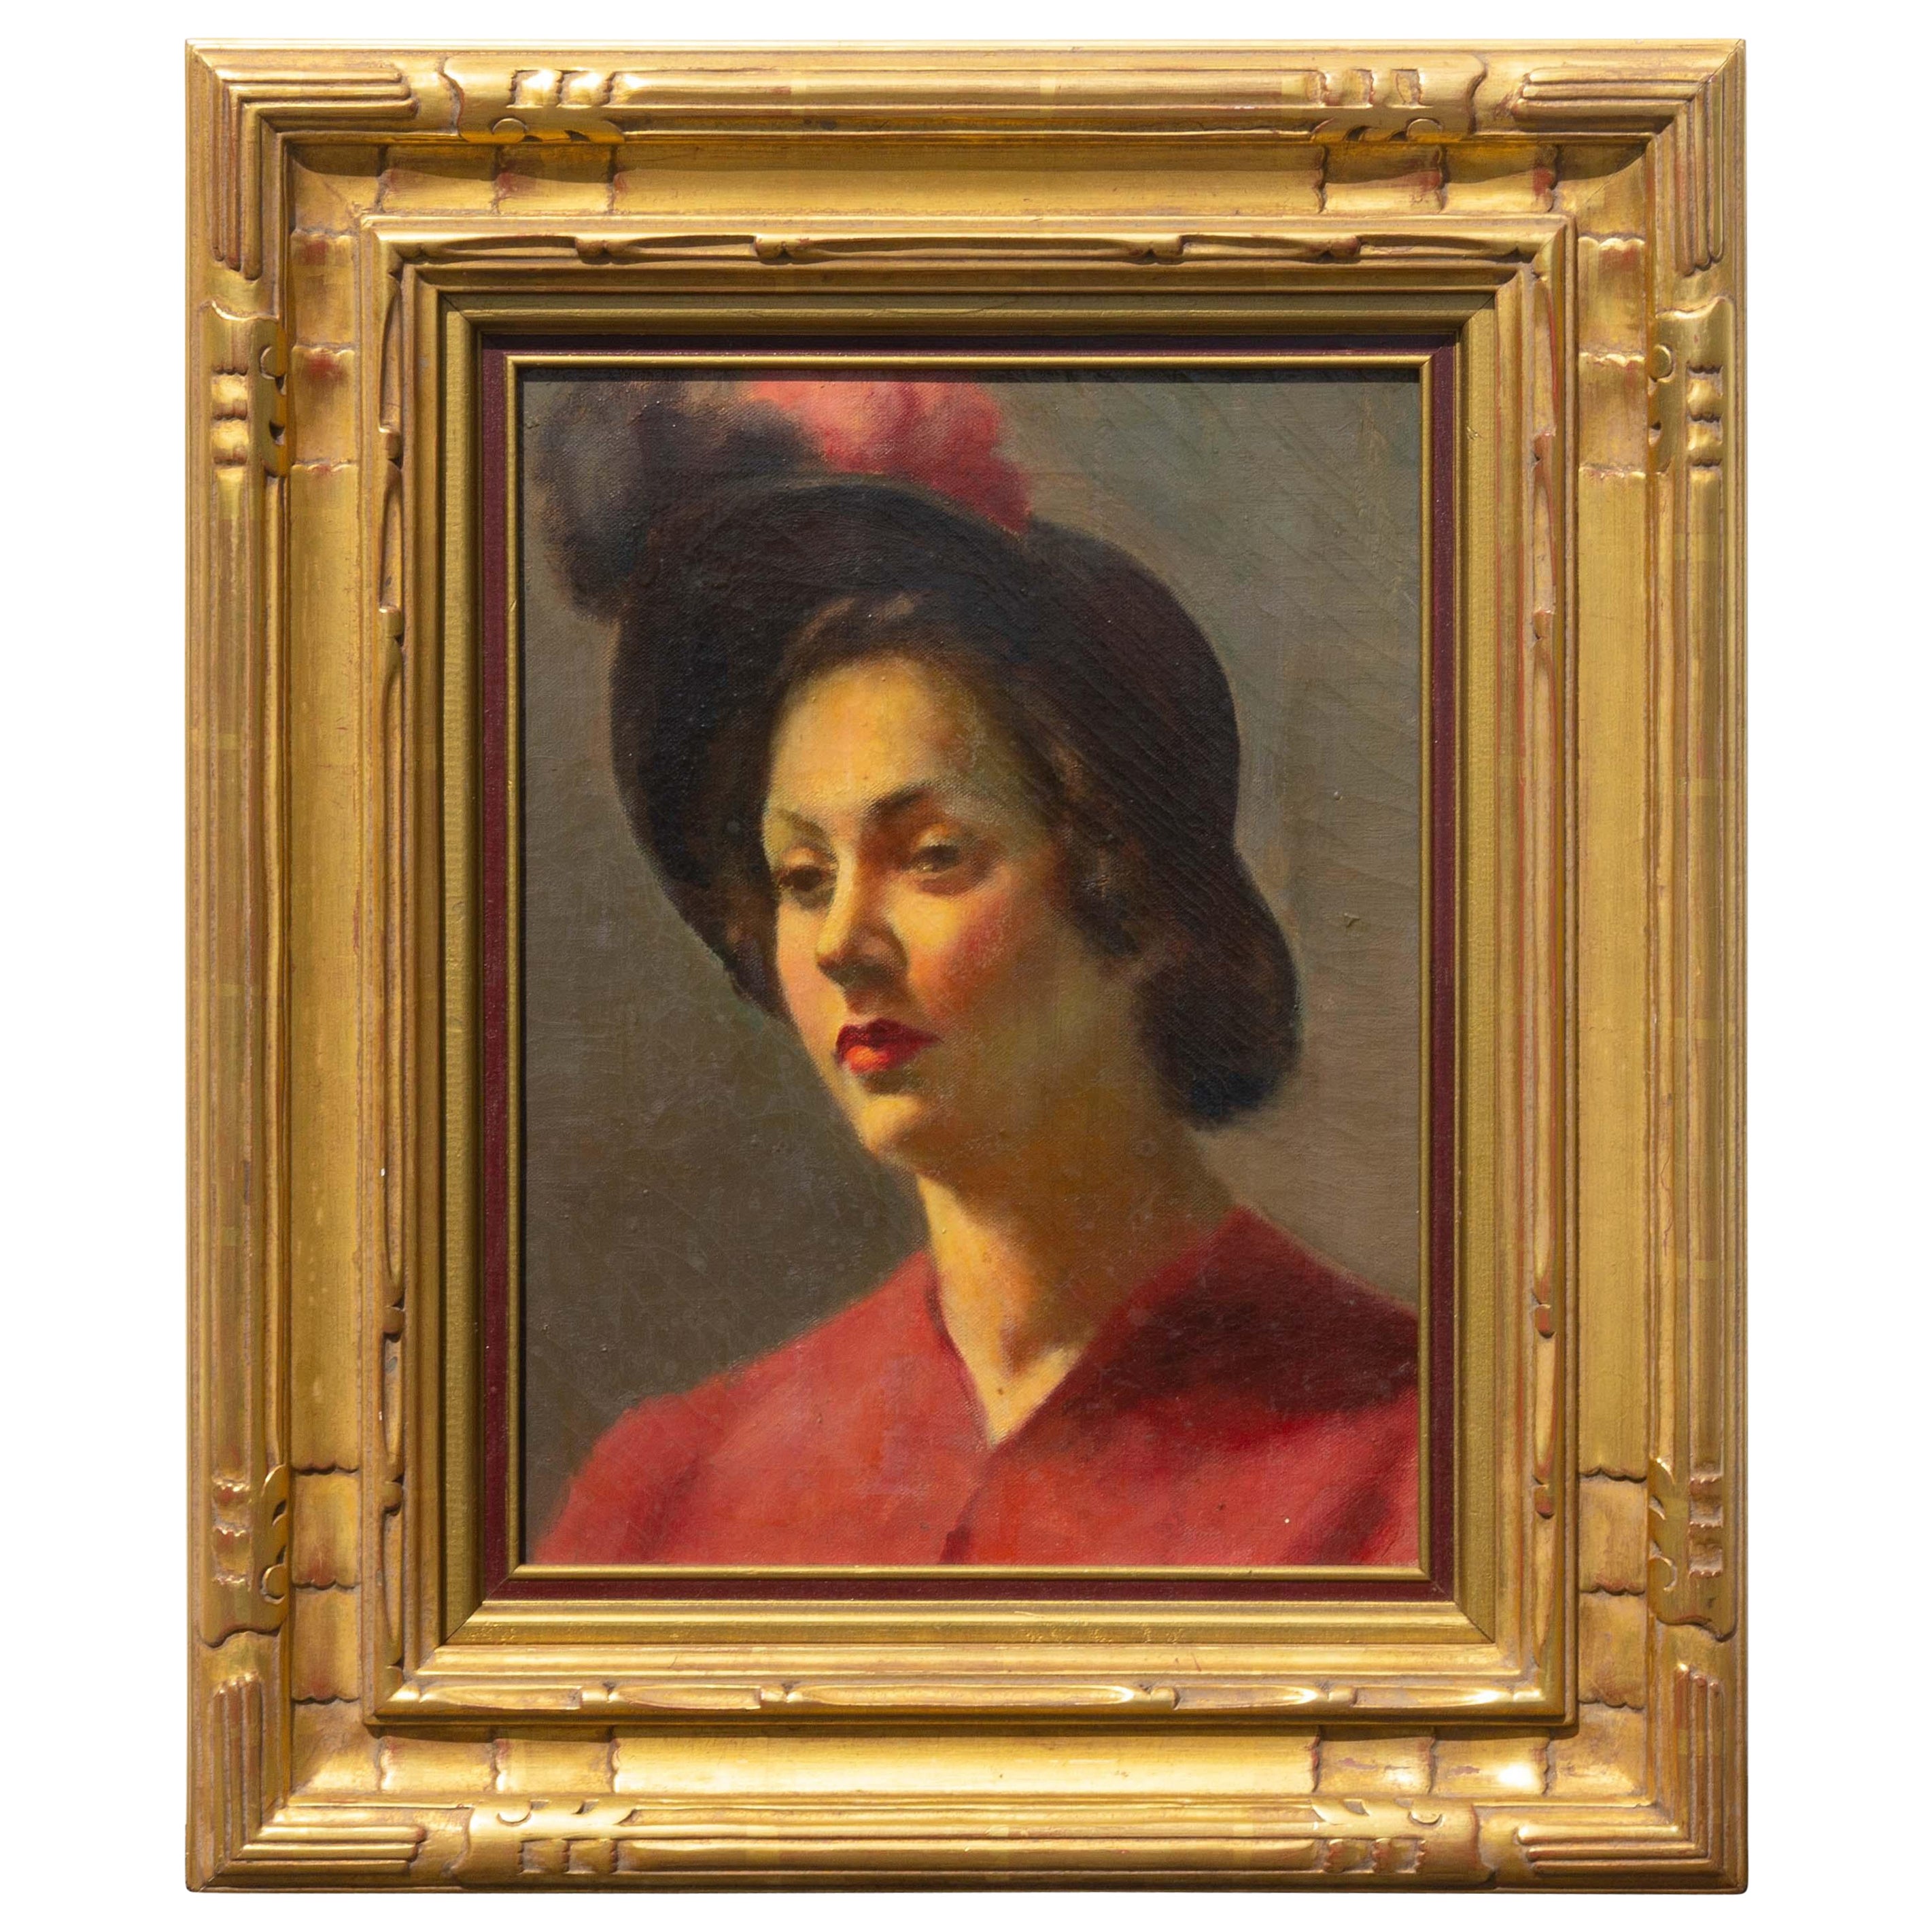 Unknown Portrait Painting - "Lady in Red" Framed Oil Portrait Circa 1950